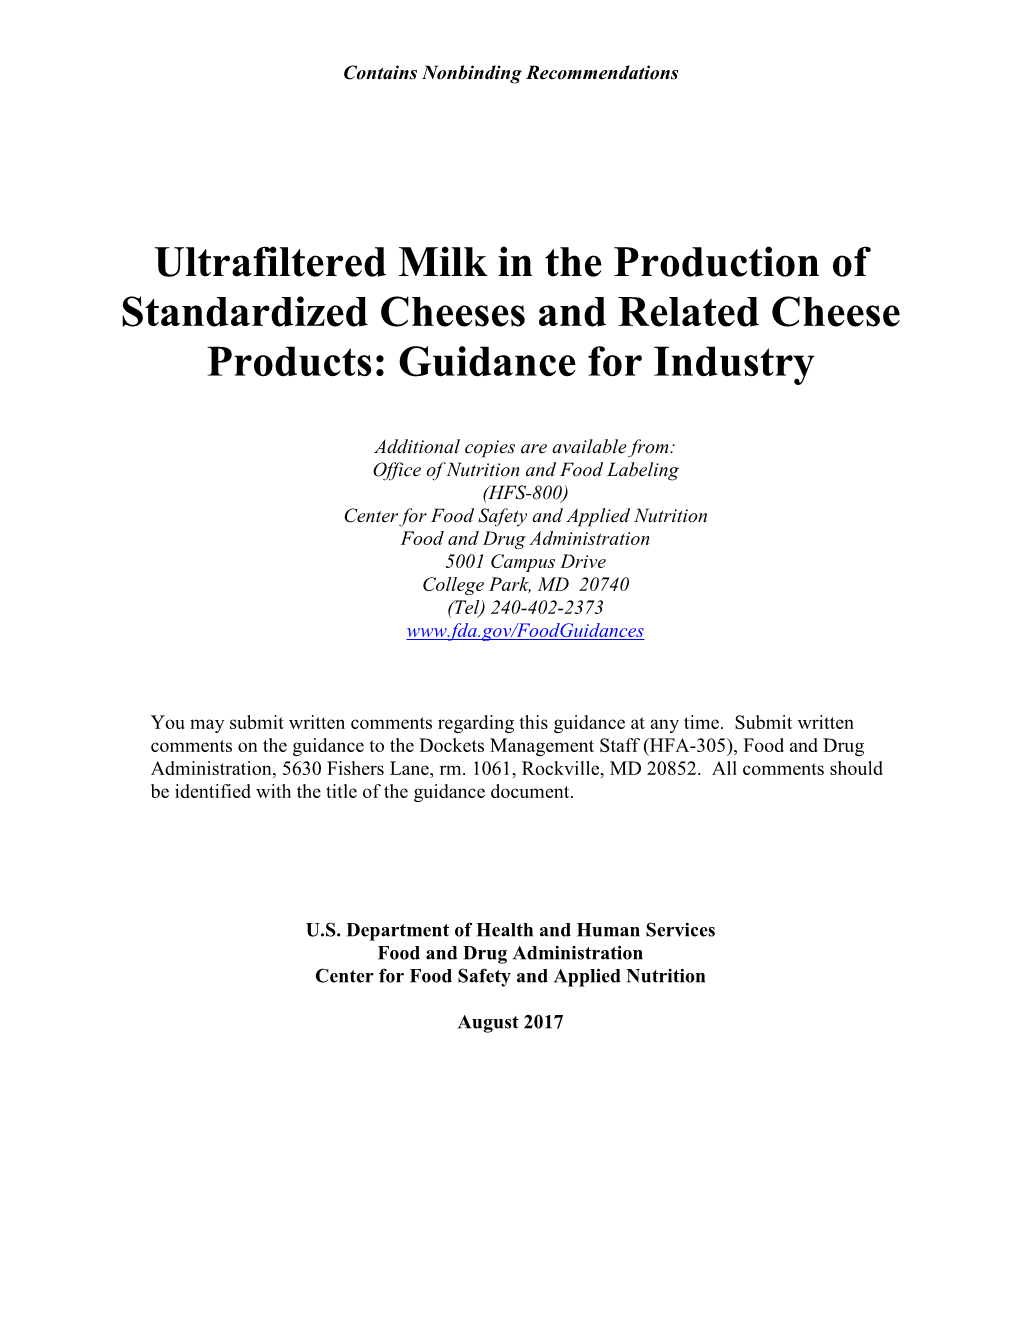 Ultrafiltered Milk in the Production of Standardized Cheeses and Related Cheese Products: Guidance for Industry